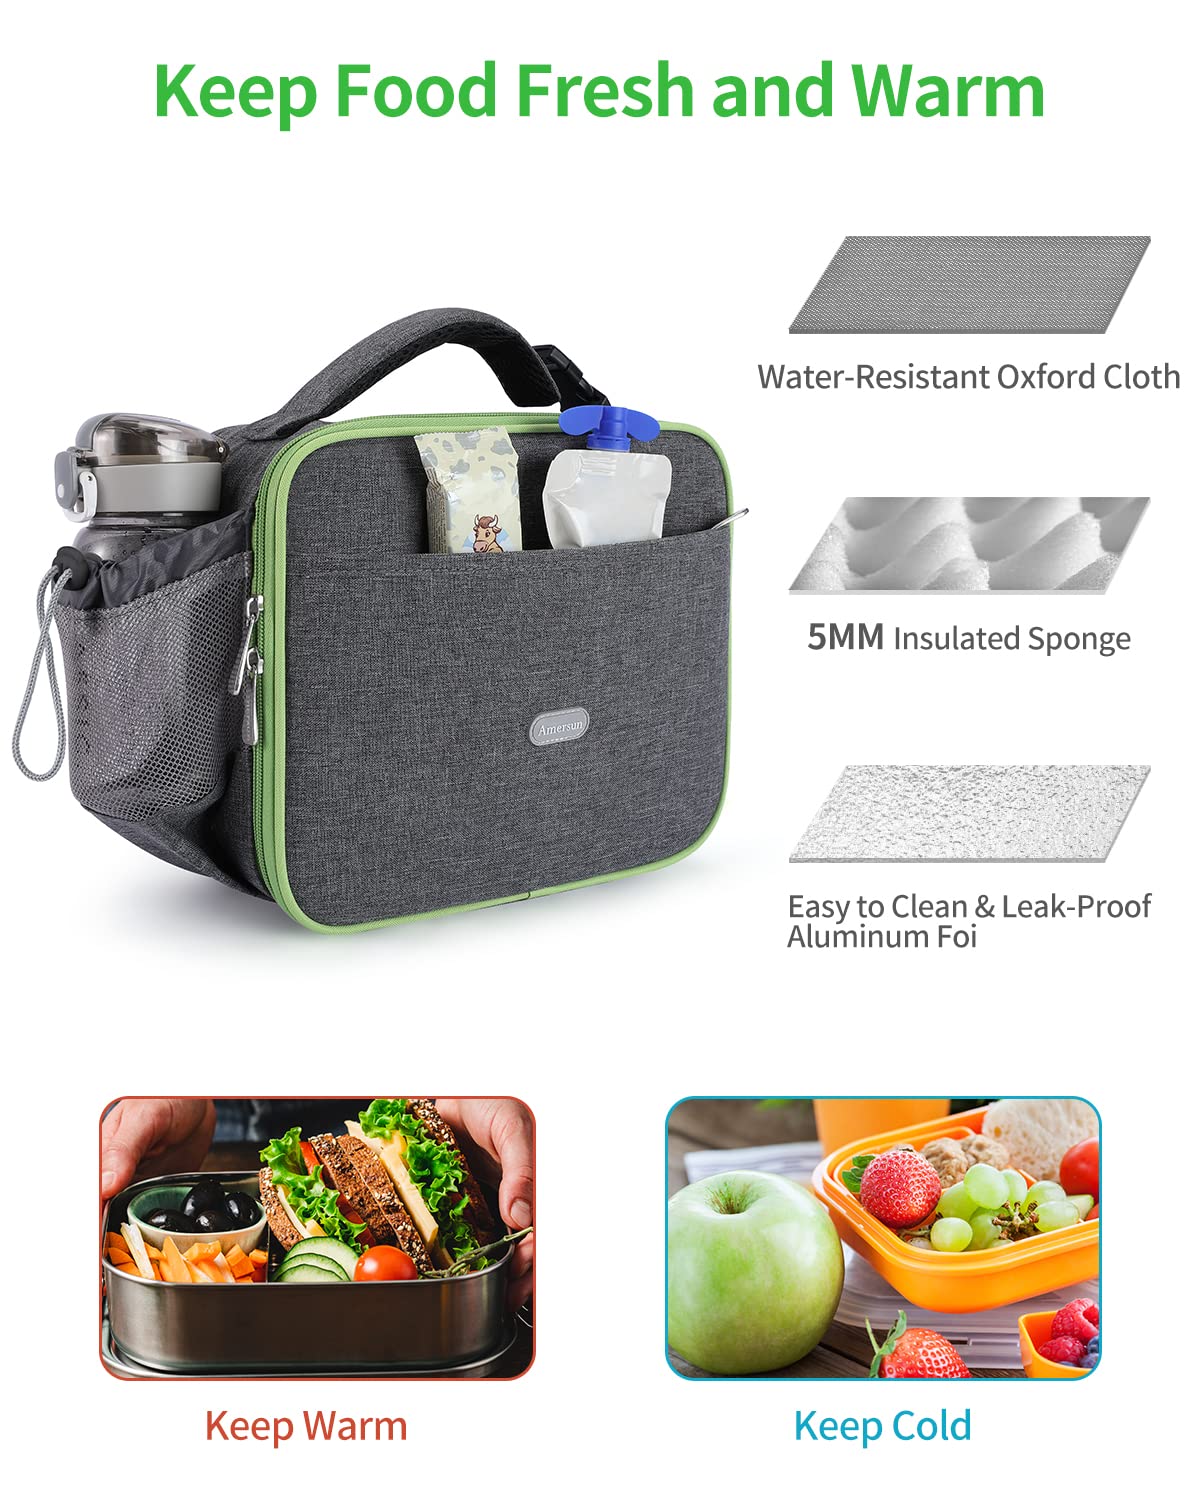 Amersun Kids Lunch Box with Multi-Pockets-Durable & Keep Food Warm Cold & Double Insulated School Lunch Cooler Bag with Water-Resistant Fabric for Kids, Girls, Boy-Children Lunch Tote (Grey)